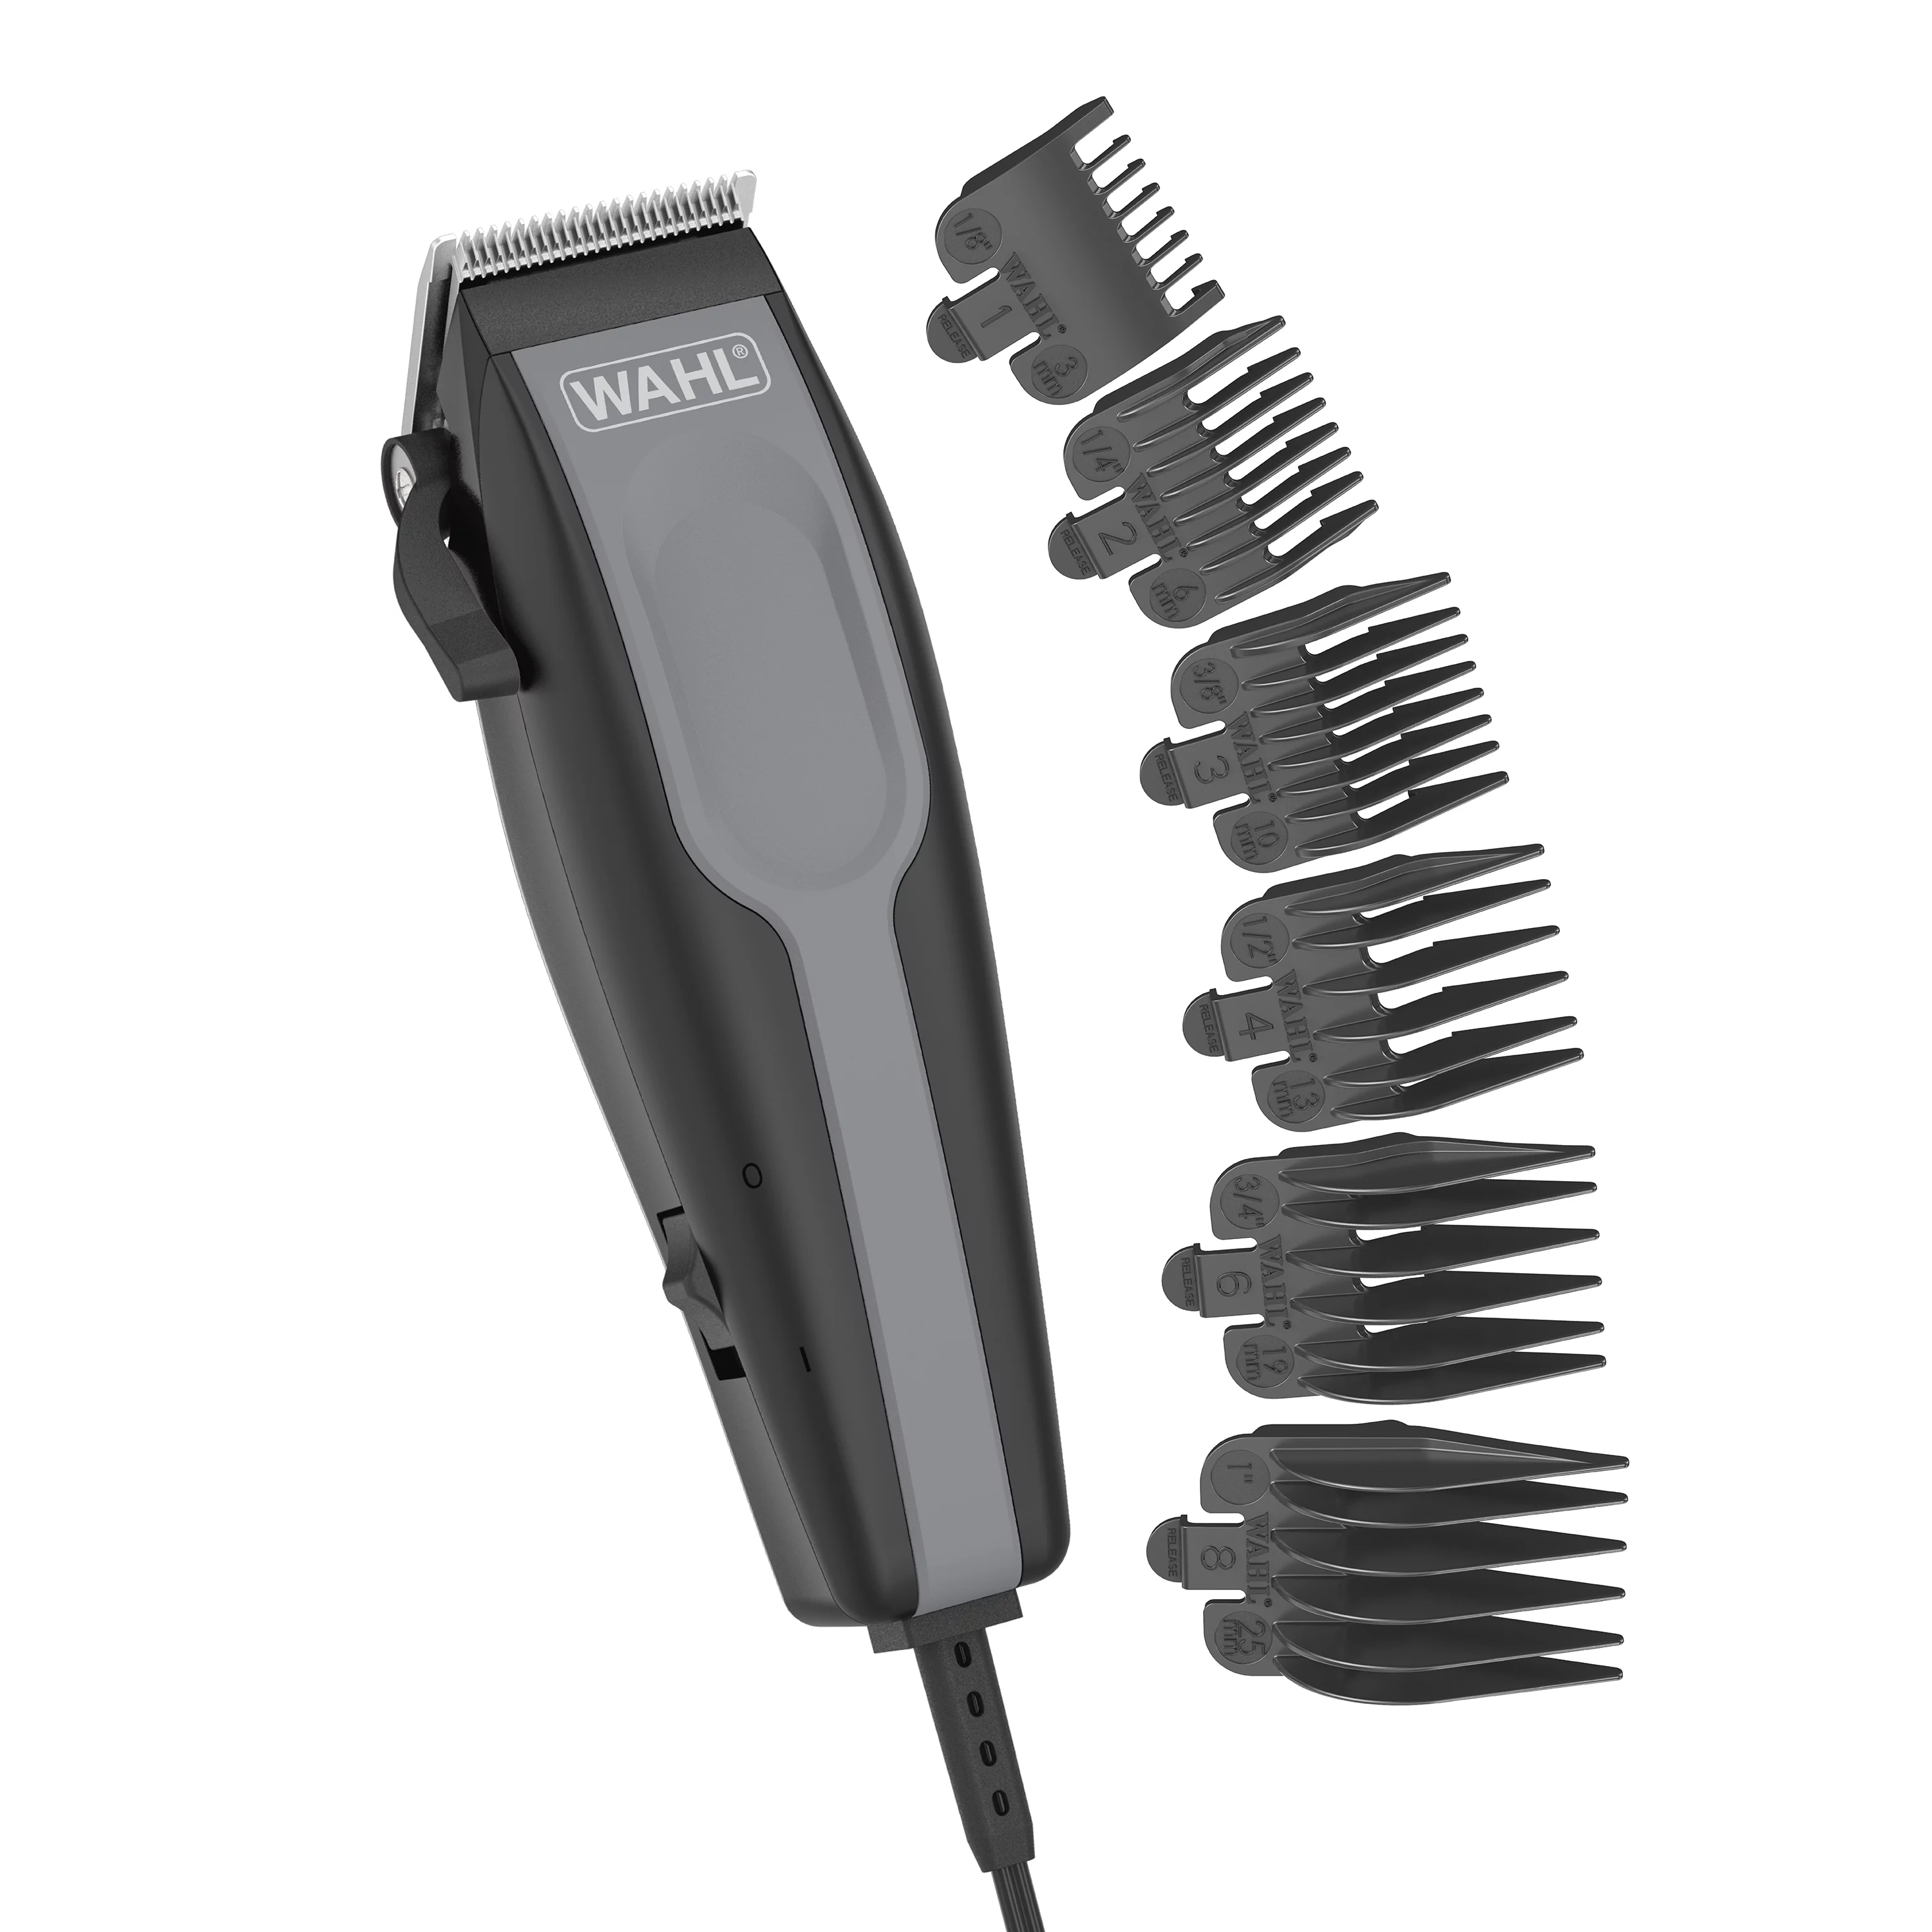 Wahl Sure Cut Hair Clipper Kit, Corded for Men and Women 79449-1001